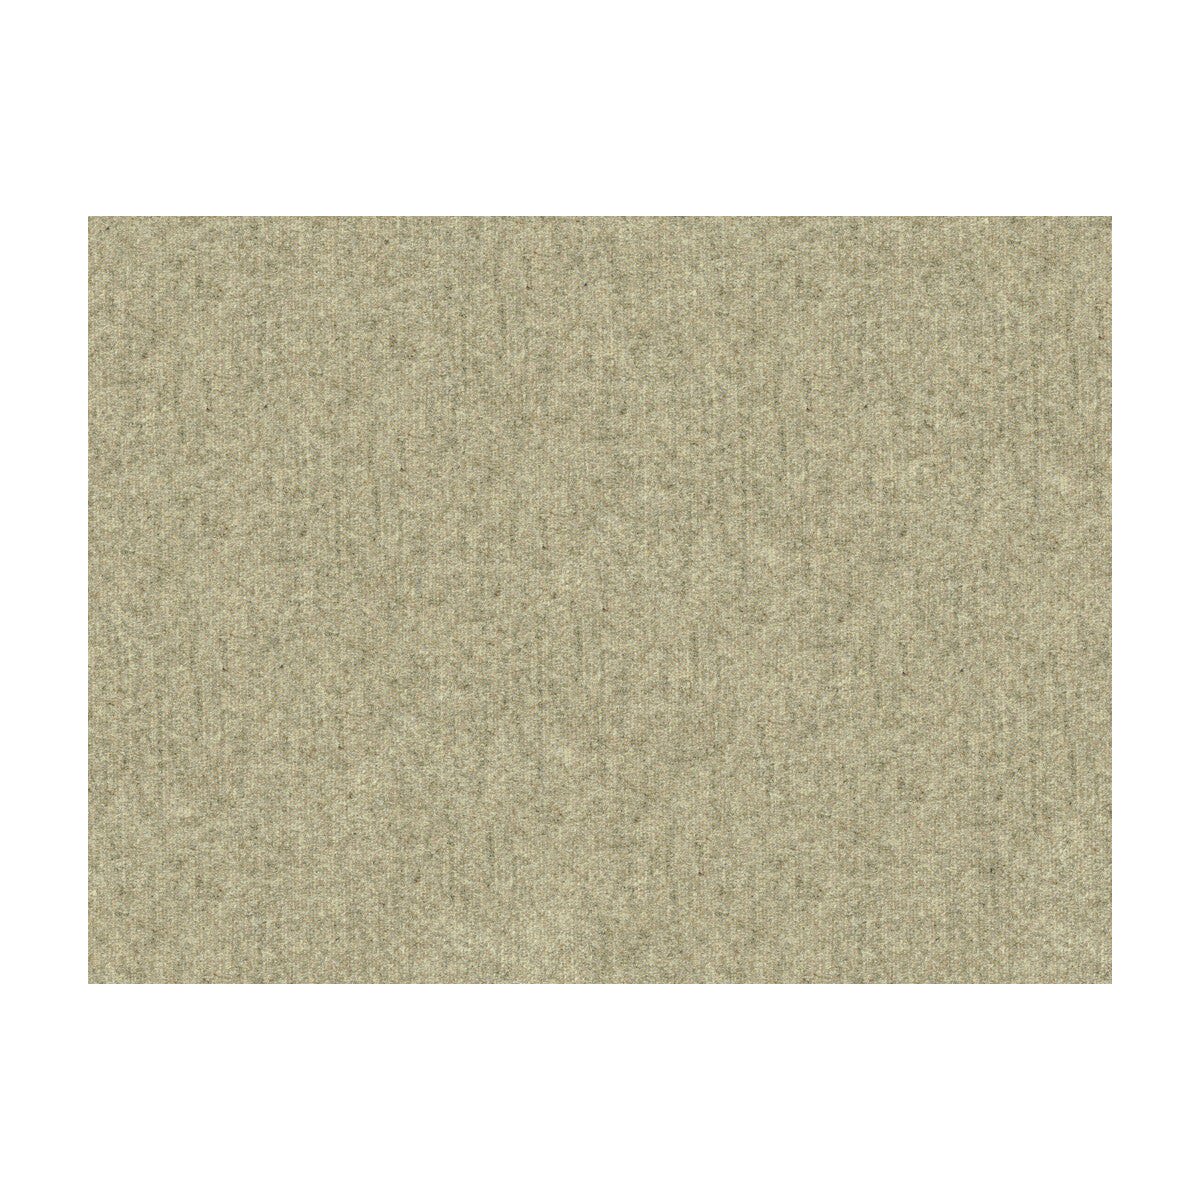 Chevalier Wool fabric in ash color - pattern 8013149.1611.0 - by Brunschwig &amp; Fils